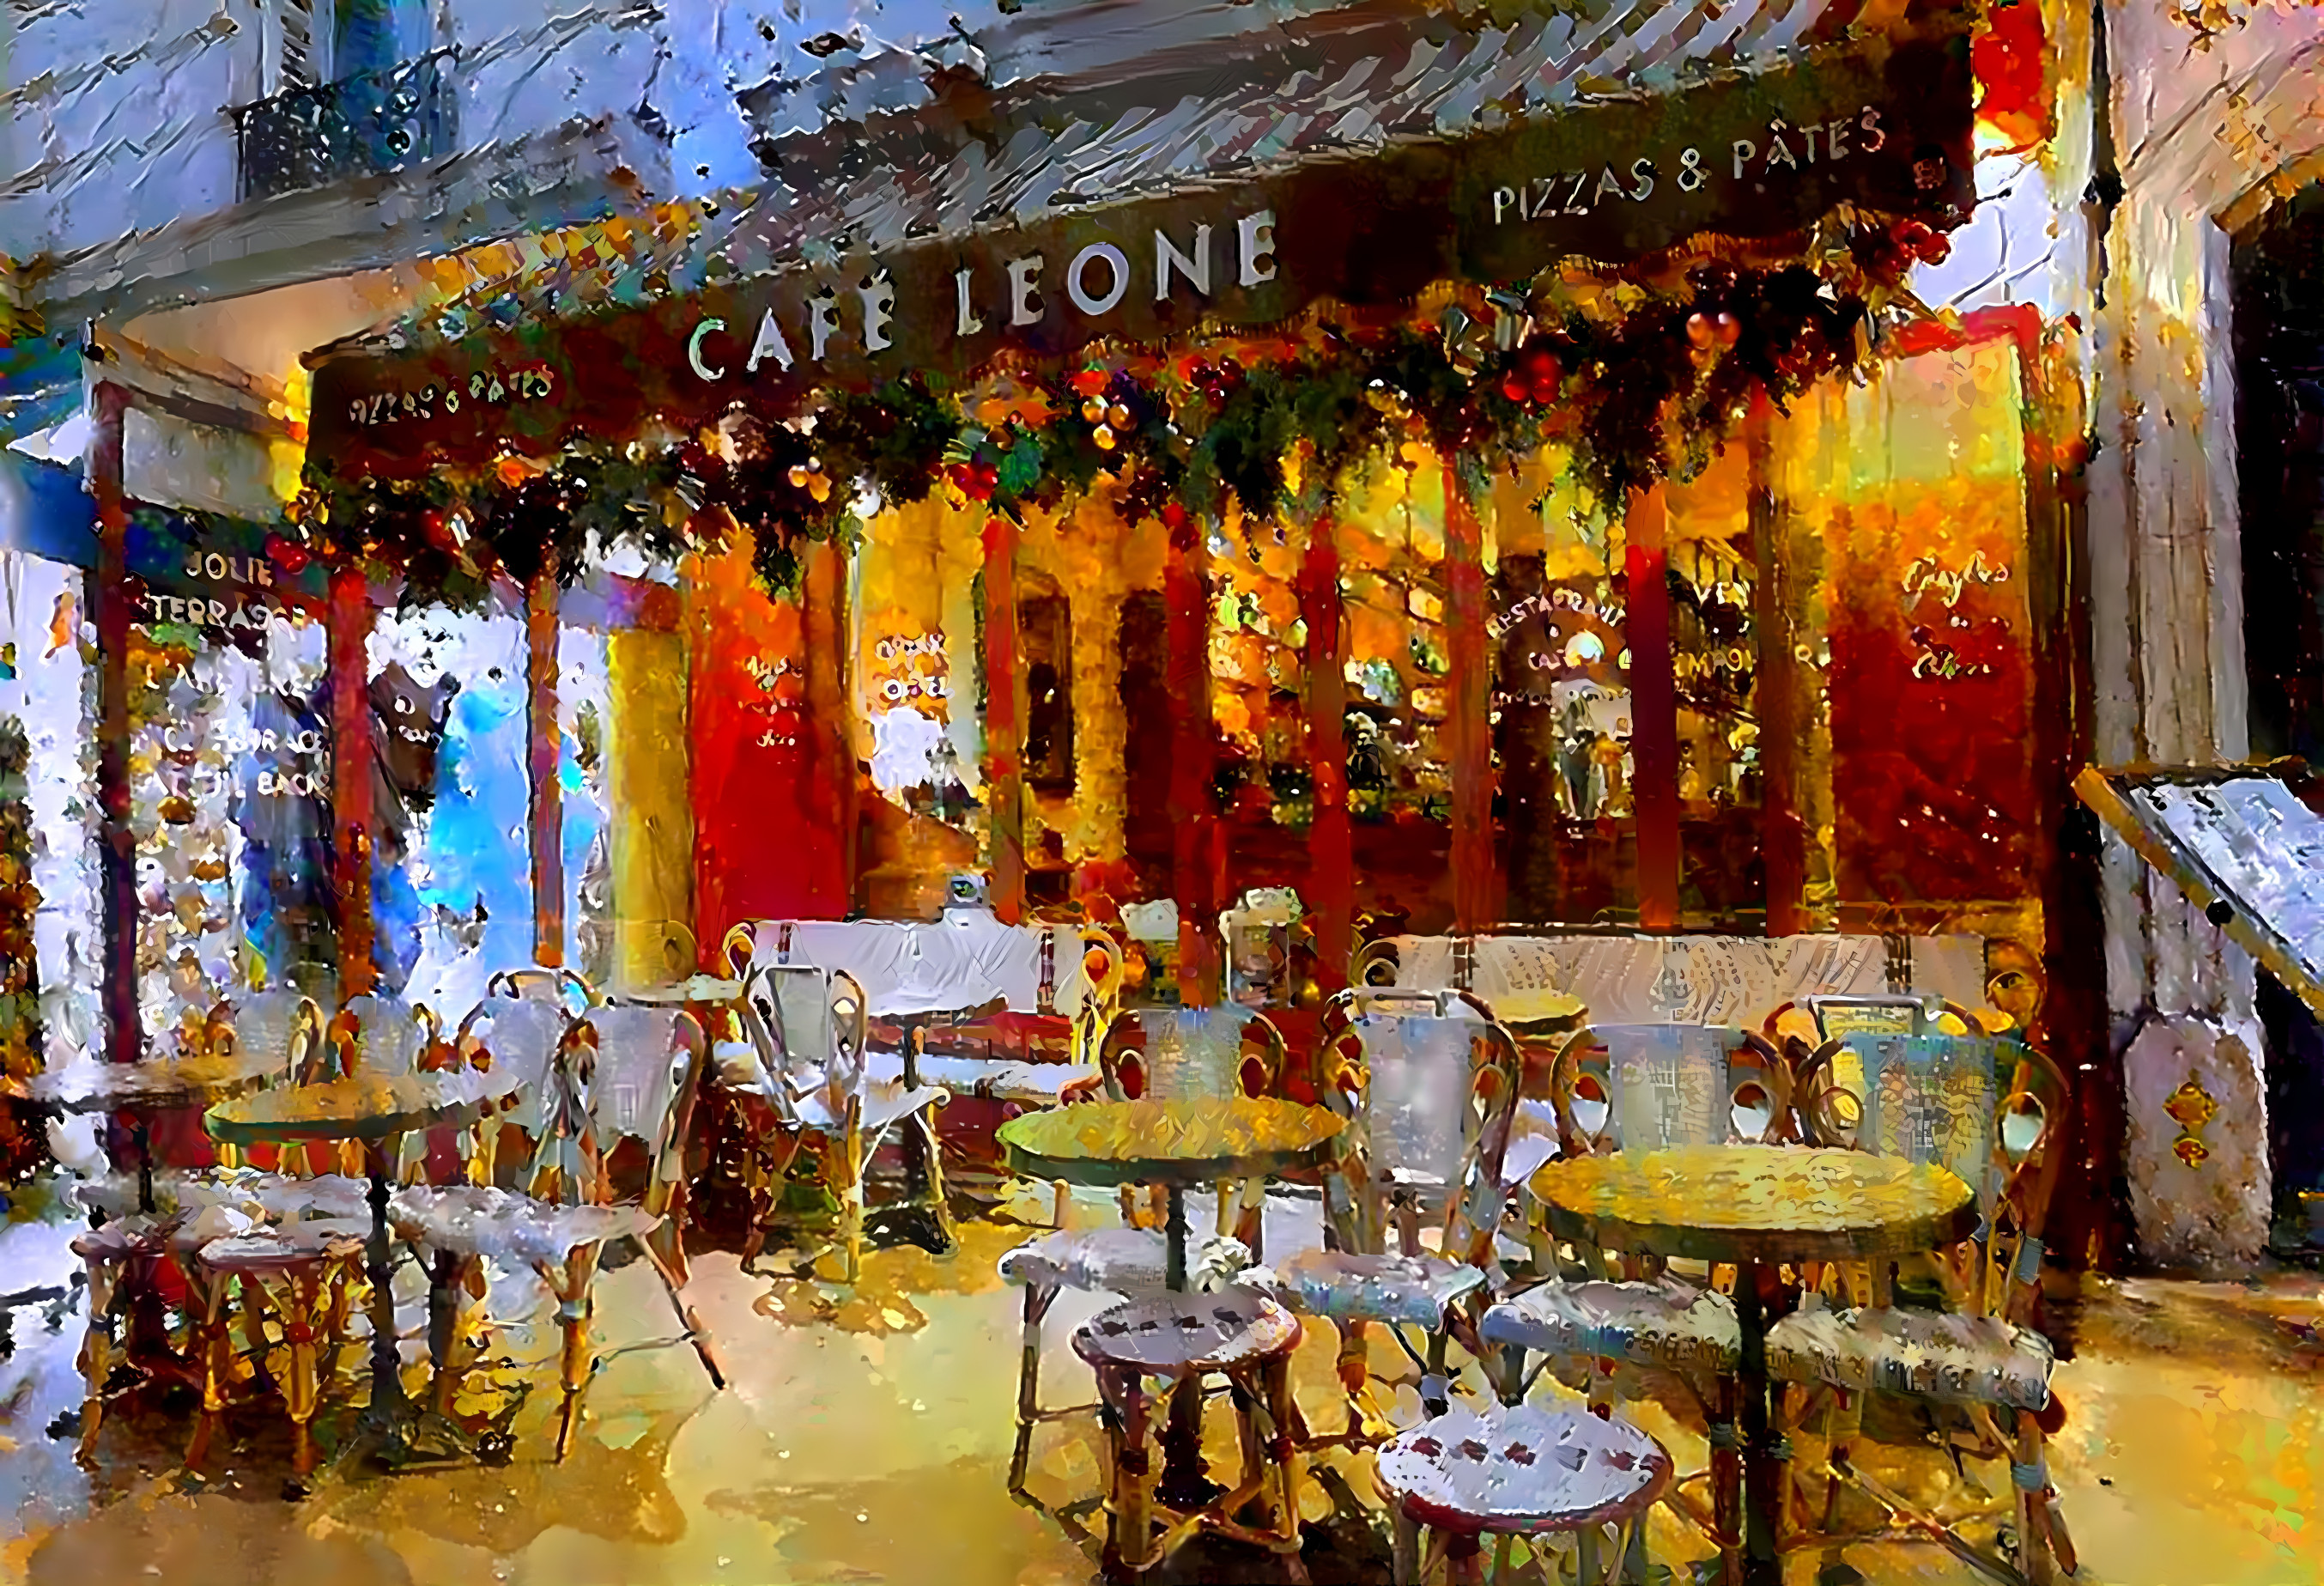 French Cafe